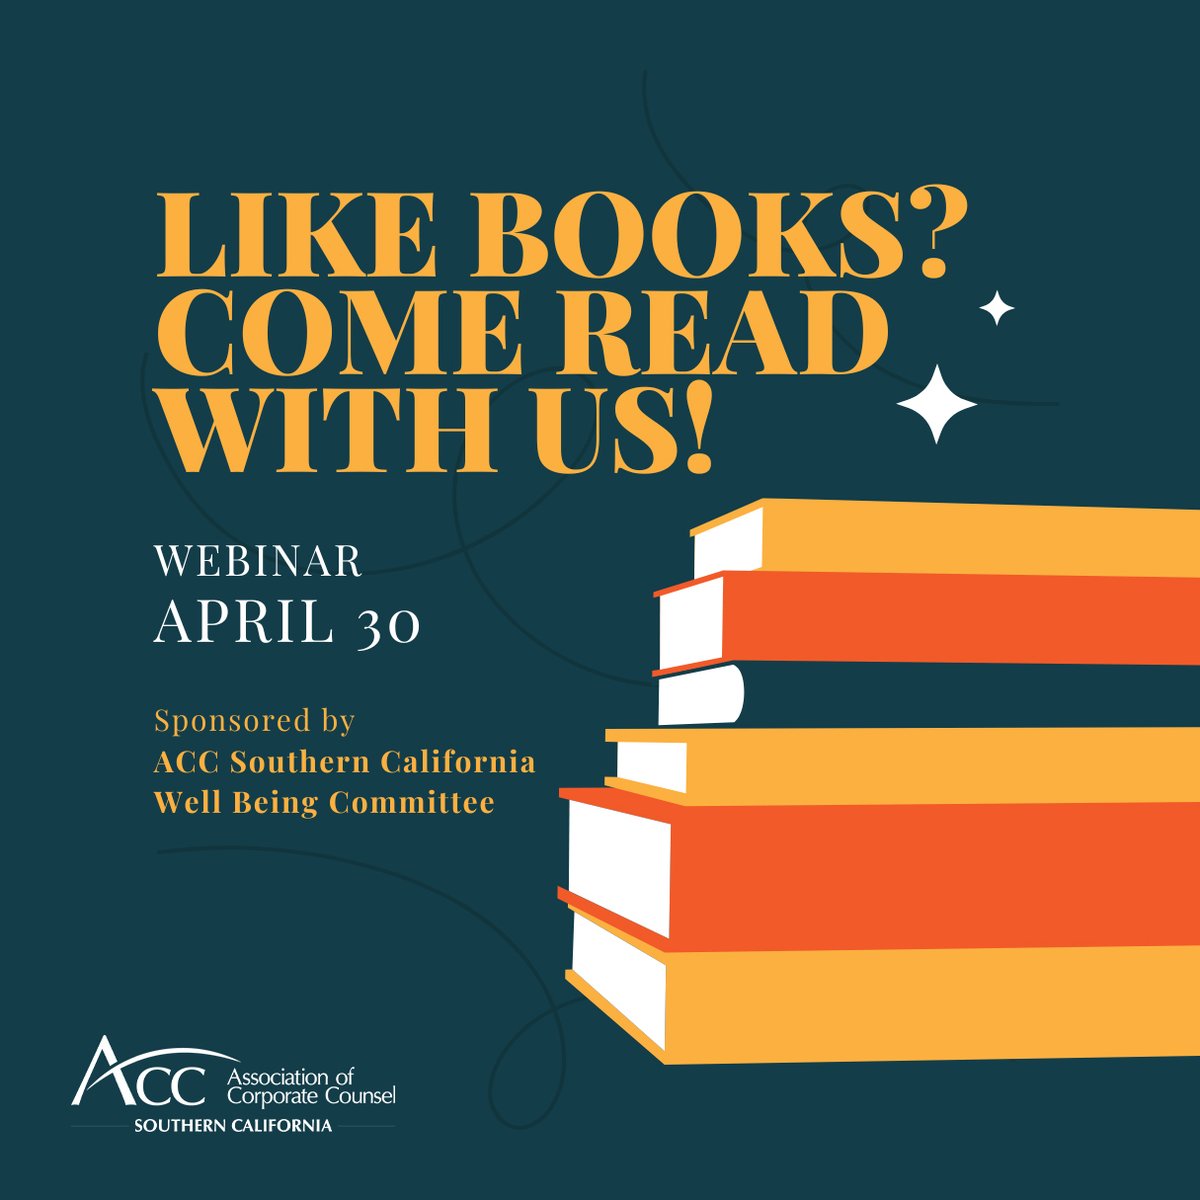 Come Read with Us!
WEBINAR
April 30, 2024
12:00 – 1:00 p.m.

Sponsored by the ACC Southern California Well Being Committee

Click Here To RSVP
acc.com/education-even…
#acc #accfamily #accsouthernca #inhousecounsel #corporatecounsel #attorneywellbeing